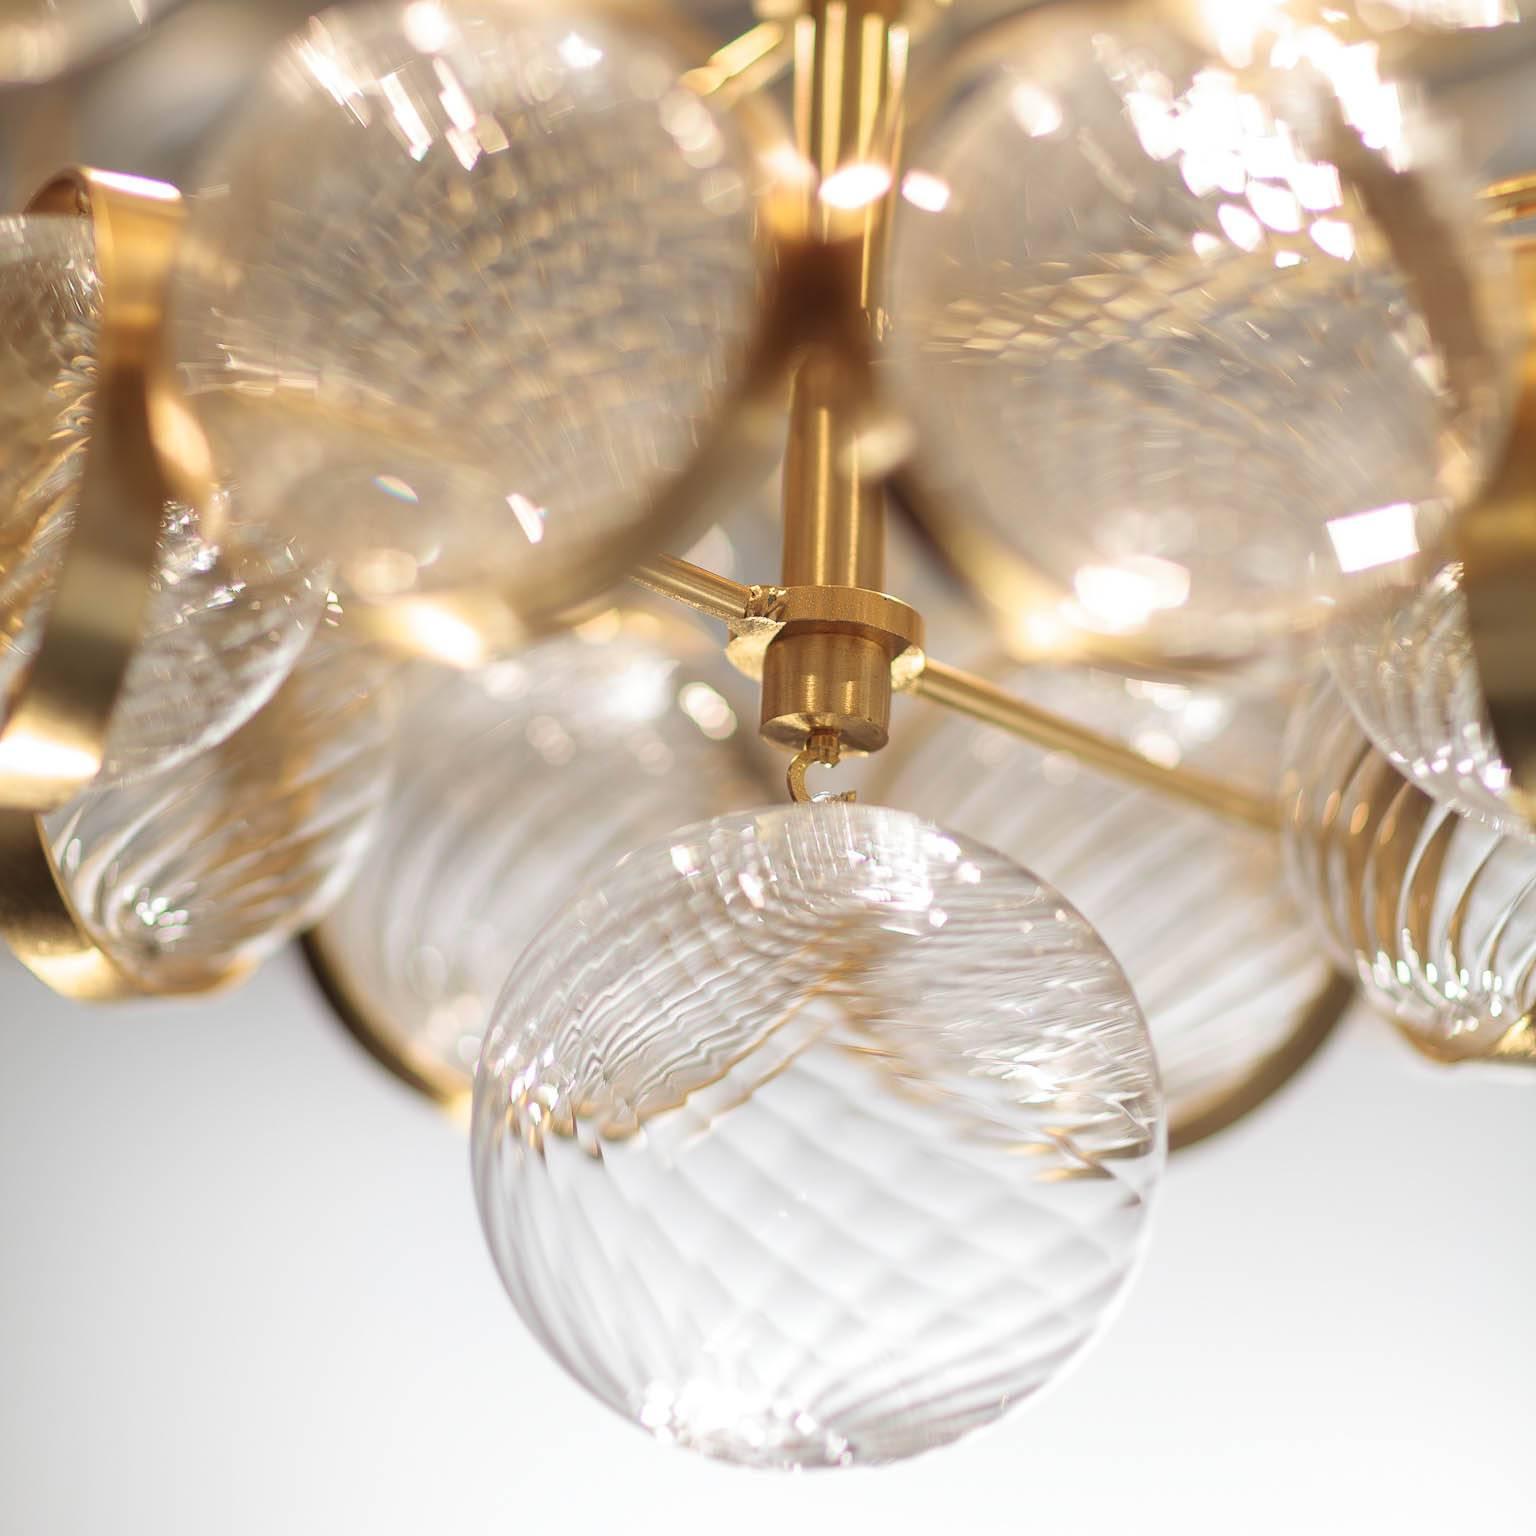 With satin gold metal and handblown clear glass spheres with spiral ribbing, the Atomos is symmetrically aligned but also has a rich vitality and brightness to it. Each textured glass ball within this lively cluster is held within a flat metal ring